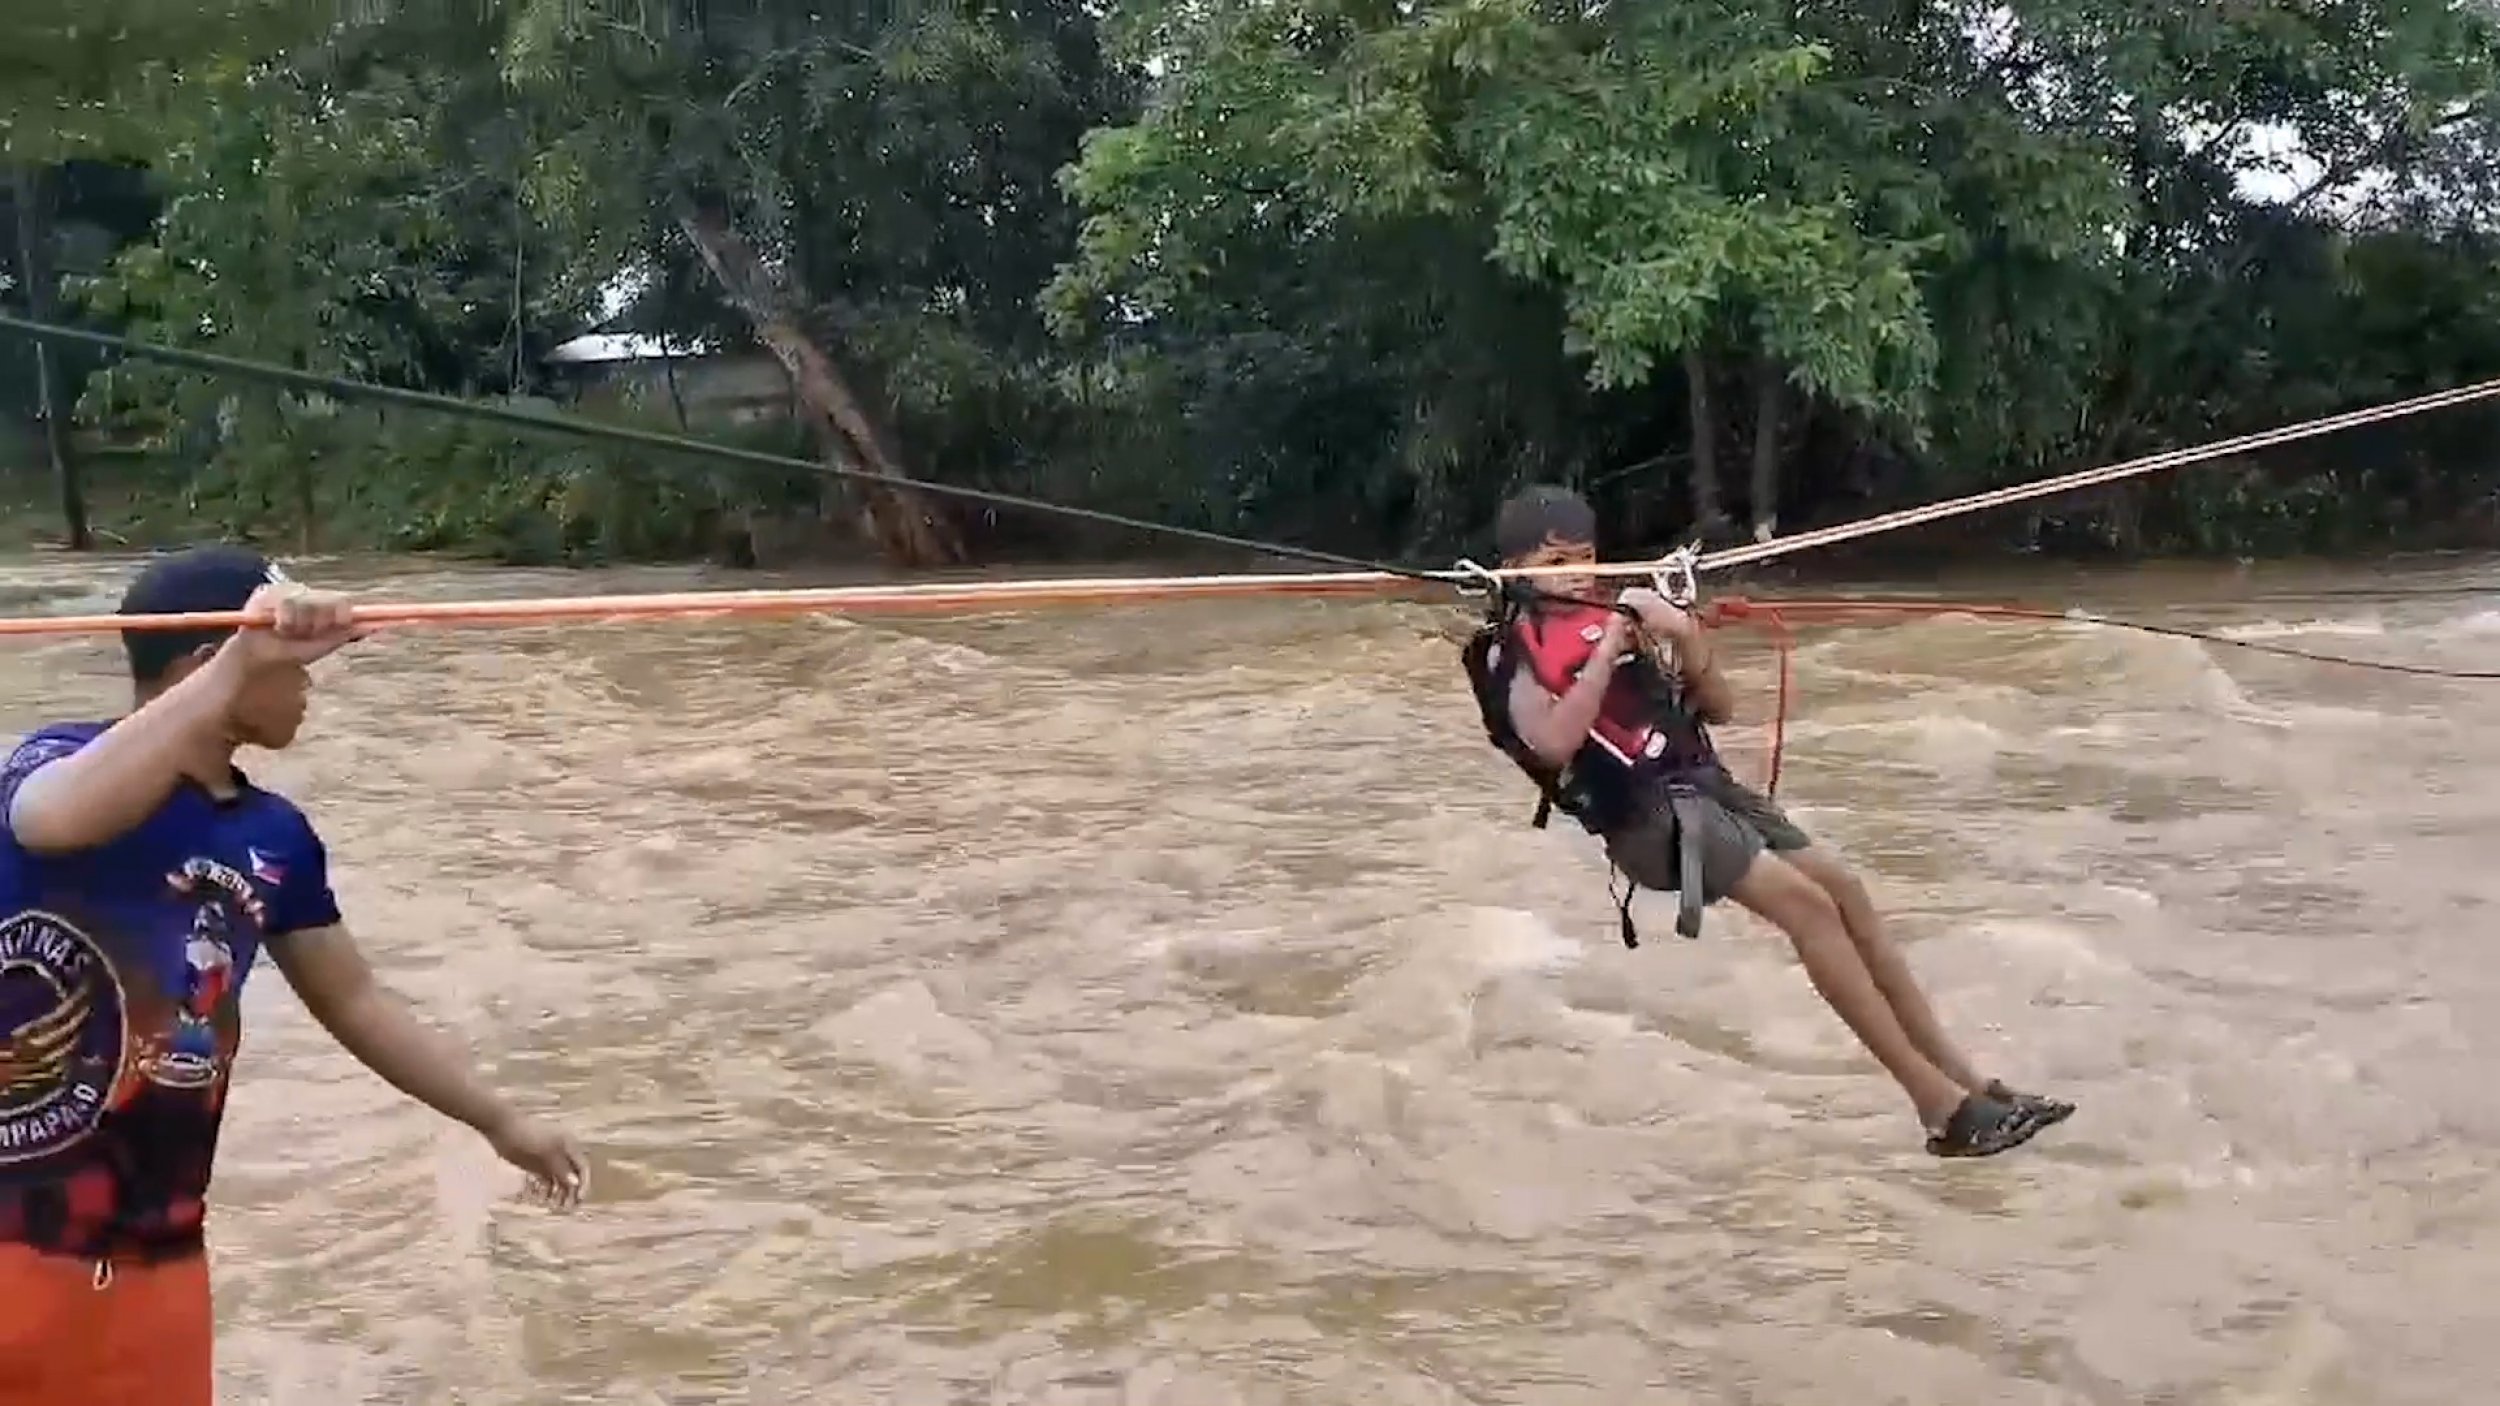 Video Shows Trapped Families Use Zipline To Cross Flooded River After Severe Storm